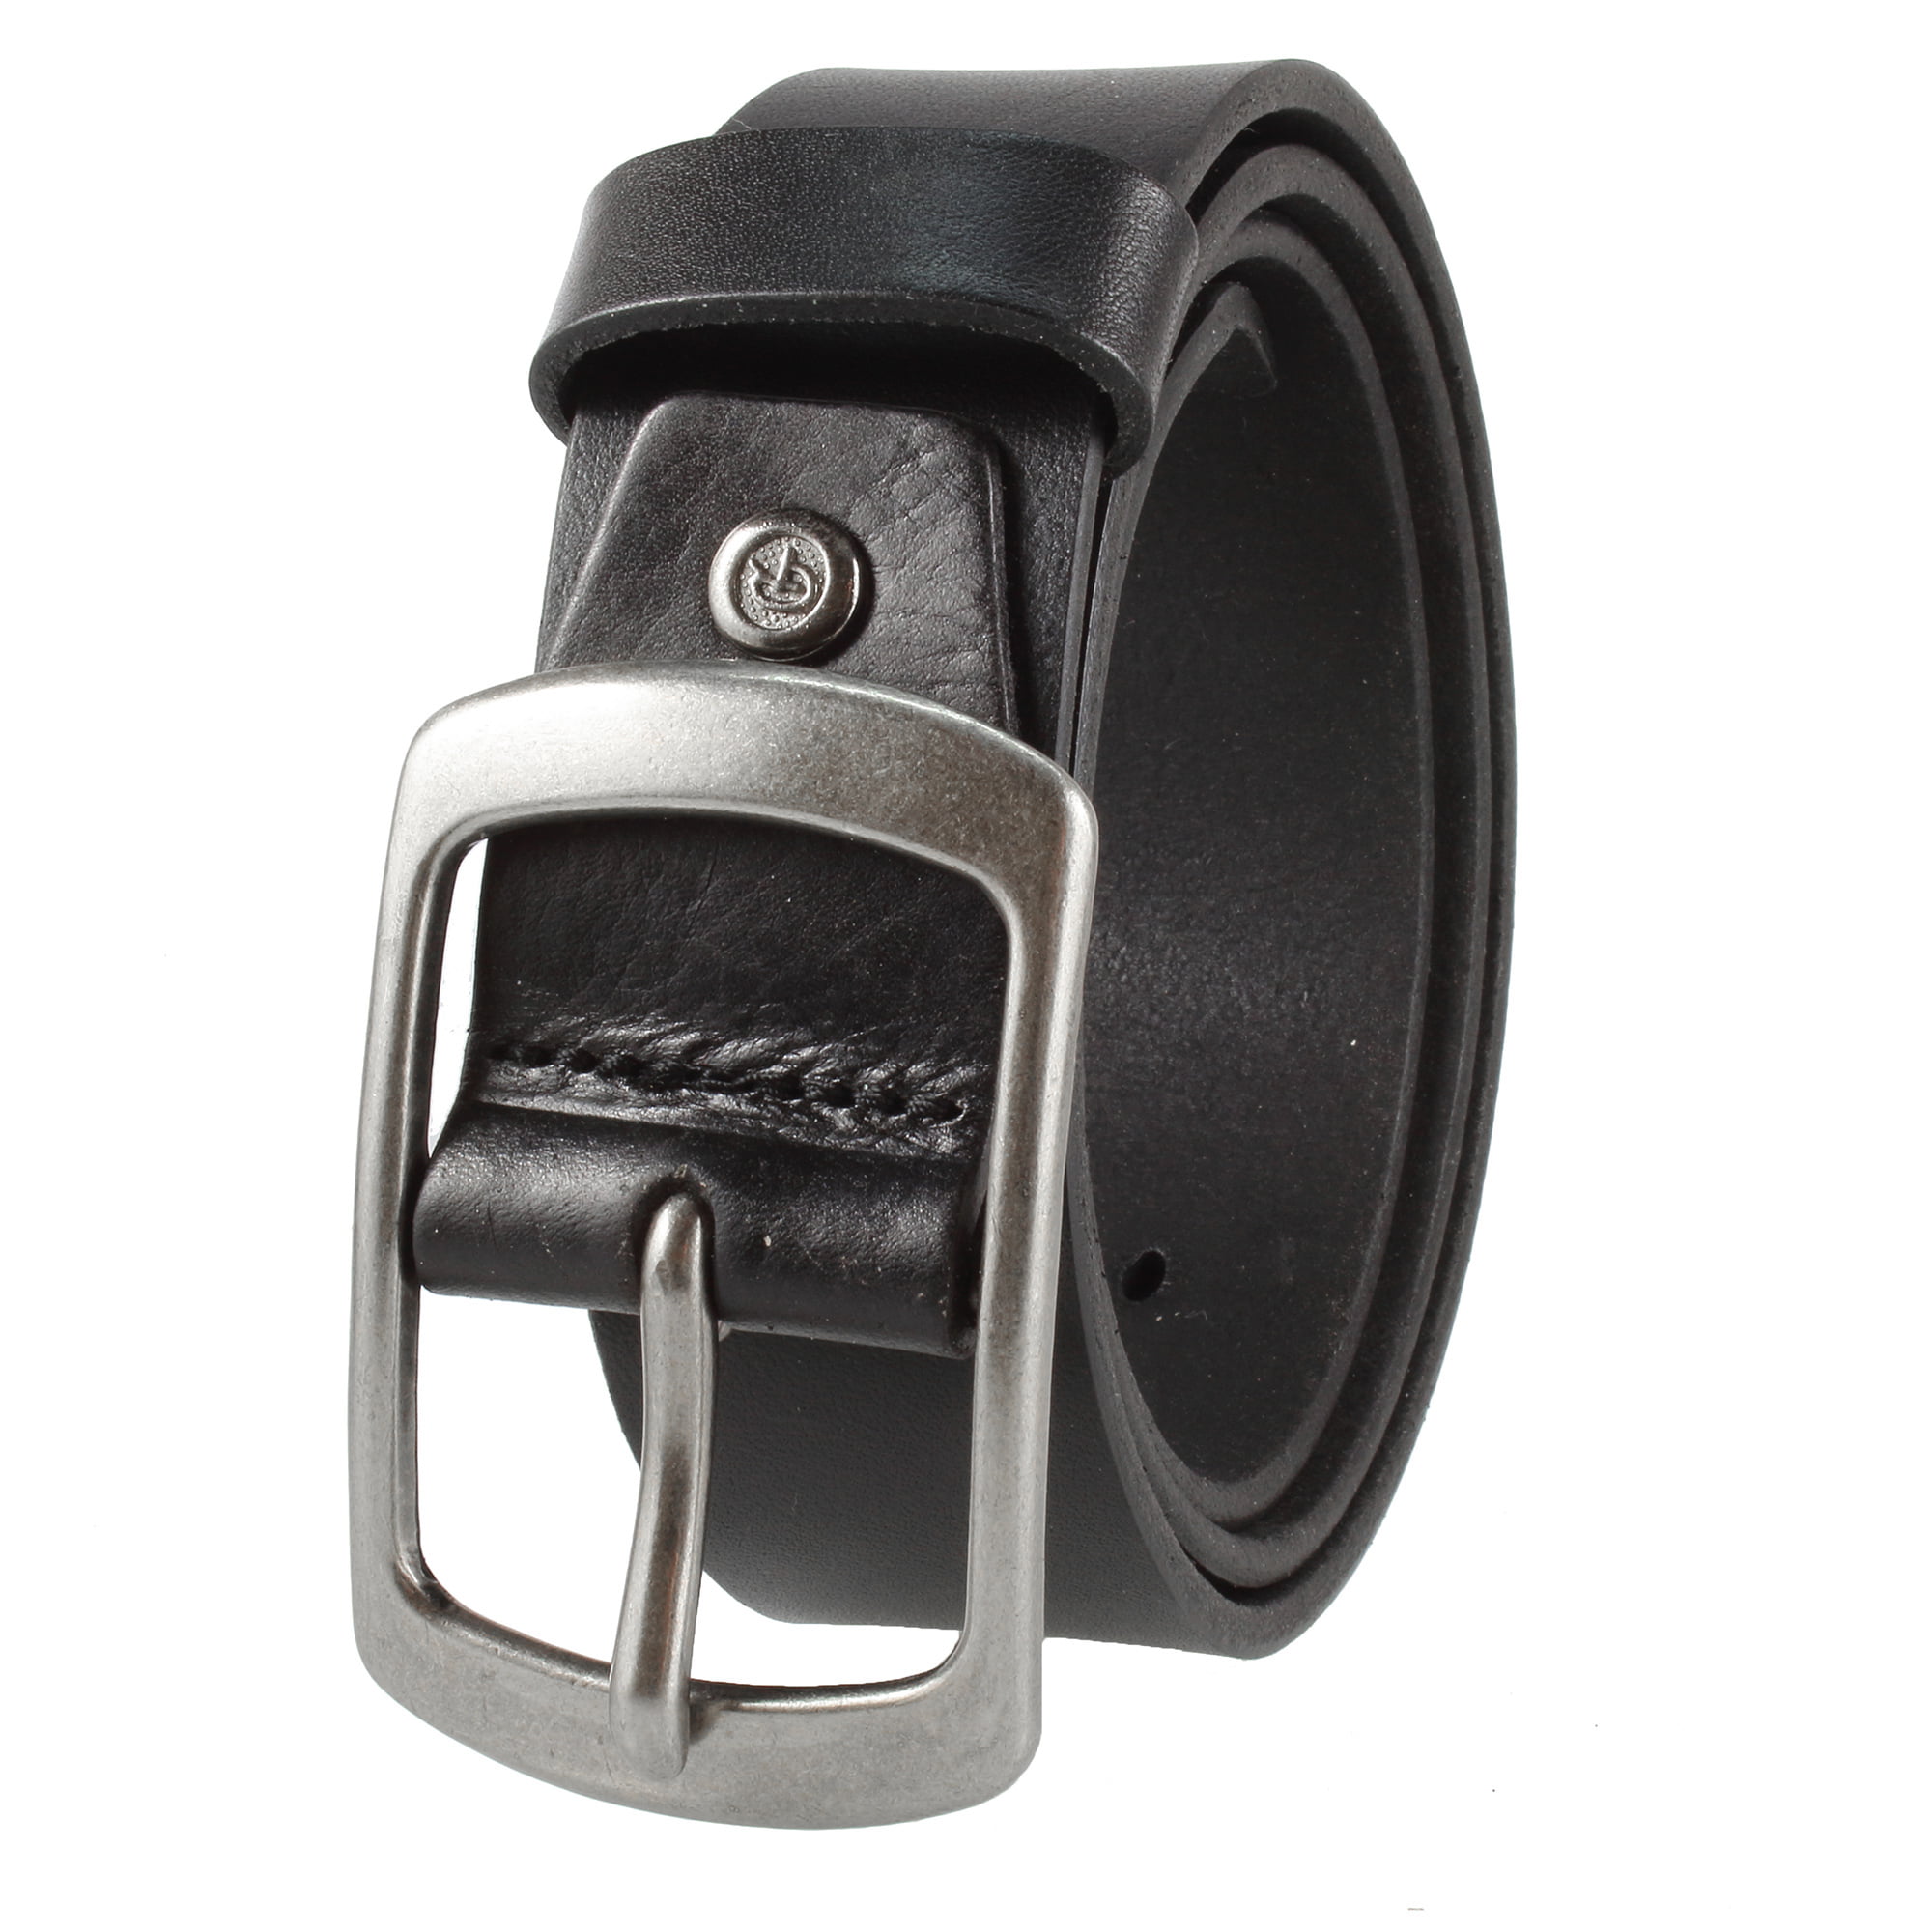 Mens Leather Belt Solid Piece Full Top Grain Casual Everyday Dress Belts for Jeans 